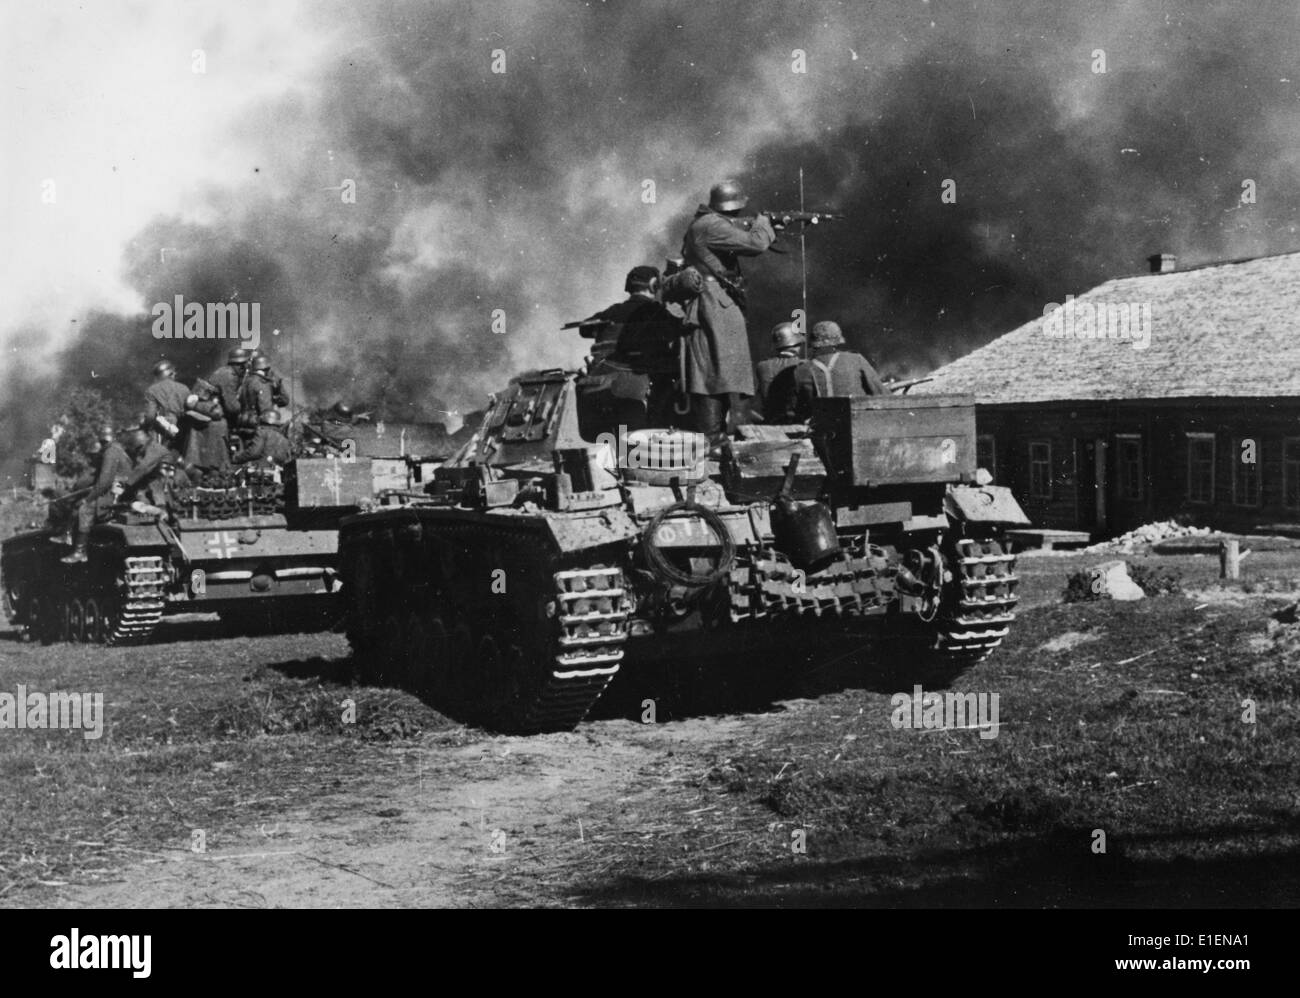 German tanks advance against Soviet settlements in October 1941. The original text from a Nazi news report on the back of the picture reads: 'The advance party at battle. The tanks of an advance party comes up against a resistance nest. The enemy' defence was tough. House after house, in which the enemy entrenched himself, was set alight. Thick clouds of smoke rose above the battle ground. The tanks pushed forward slowly, with the infantry advanced behind weapon at the ready.' Fotoarchiv für Zeitgeschichtee - NO WIRE SERVICE Stock Photo